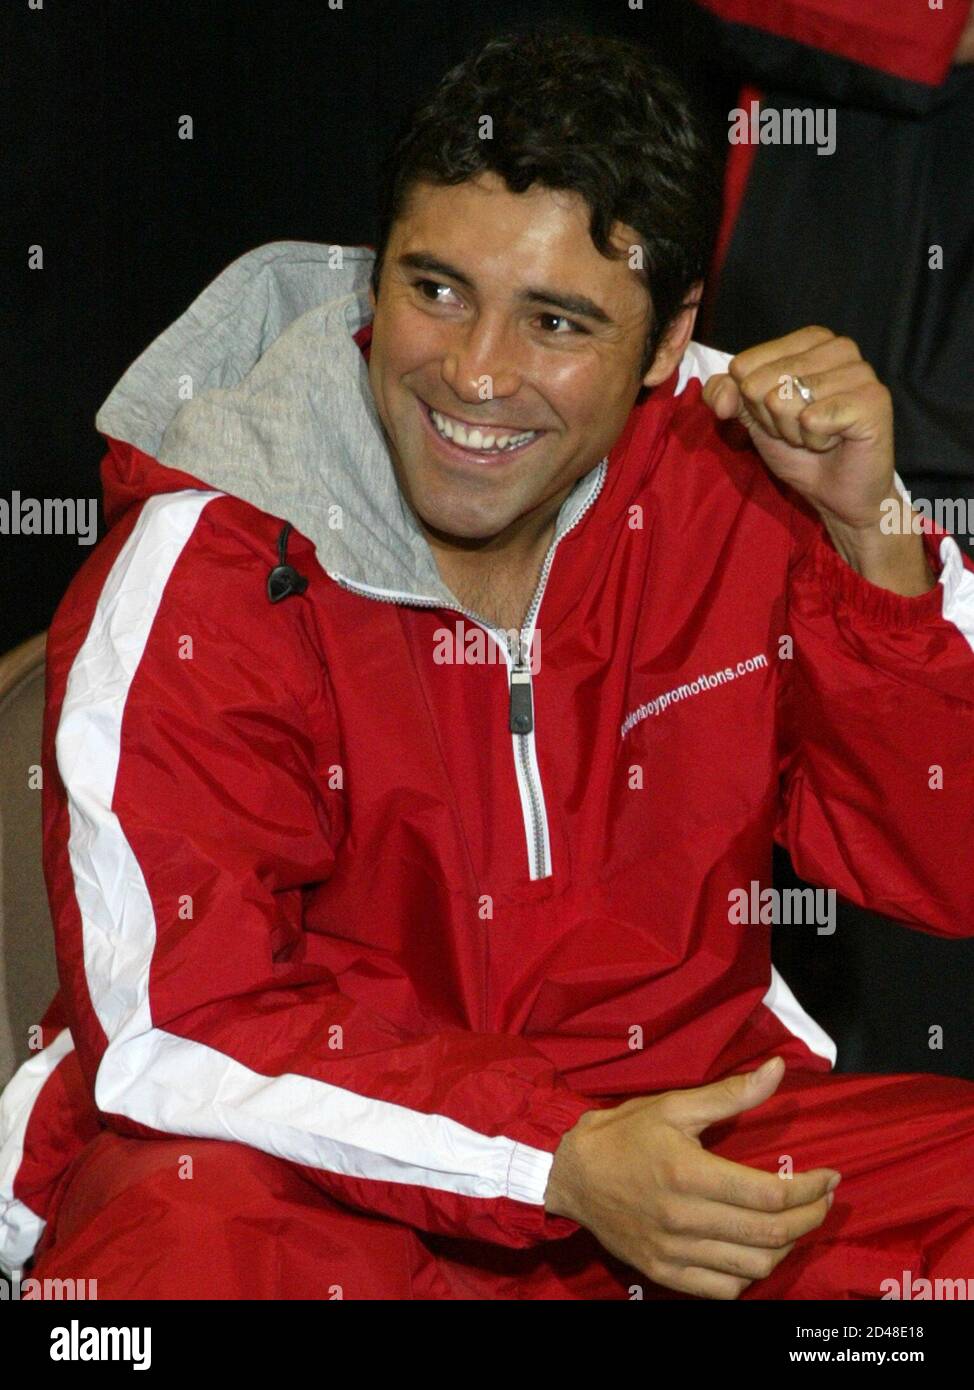 WBC/WBA super welterweight champion Oscar De La Hoya acknowledges cheers from the audience as he waits to weigh-in at the Mandalay Bay Events Center in Las Vegas, Nevada, May 2, 2003. De La Hoya (35-2) of Los Angeles, defends his title against Yory Boy Campas (80-5) of Navajoa, Mexico at the events center on May 3. De La Hoya weighed the limit of 154 lbs. Campas weighed 153.5 lbs. REUTERS/Steve Marcus  SM Stock Photo